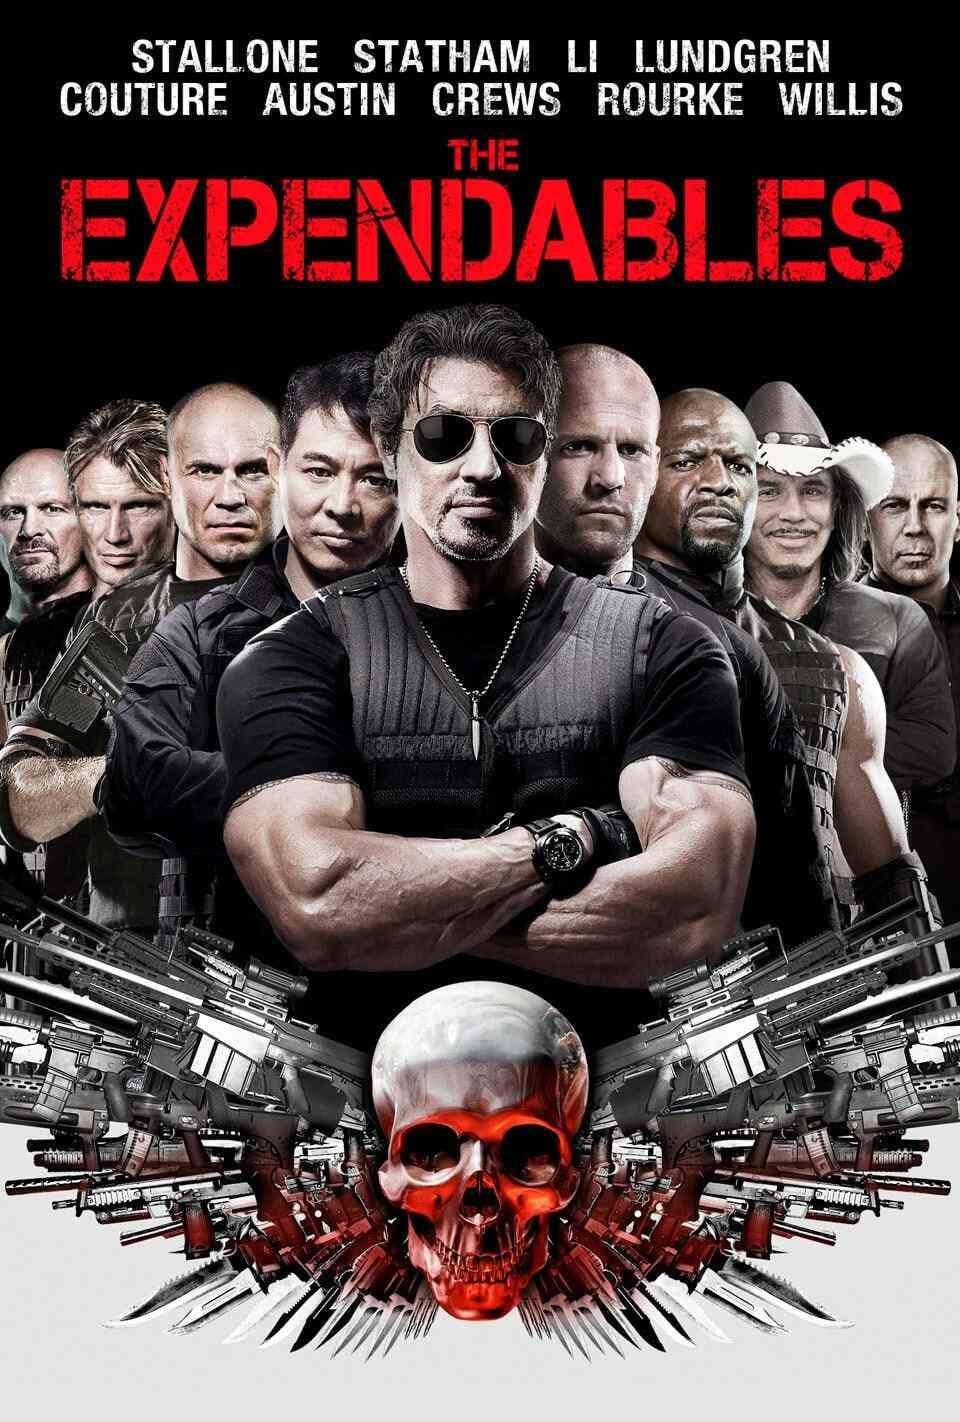 Read The Expendables screenplay.